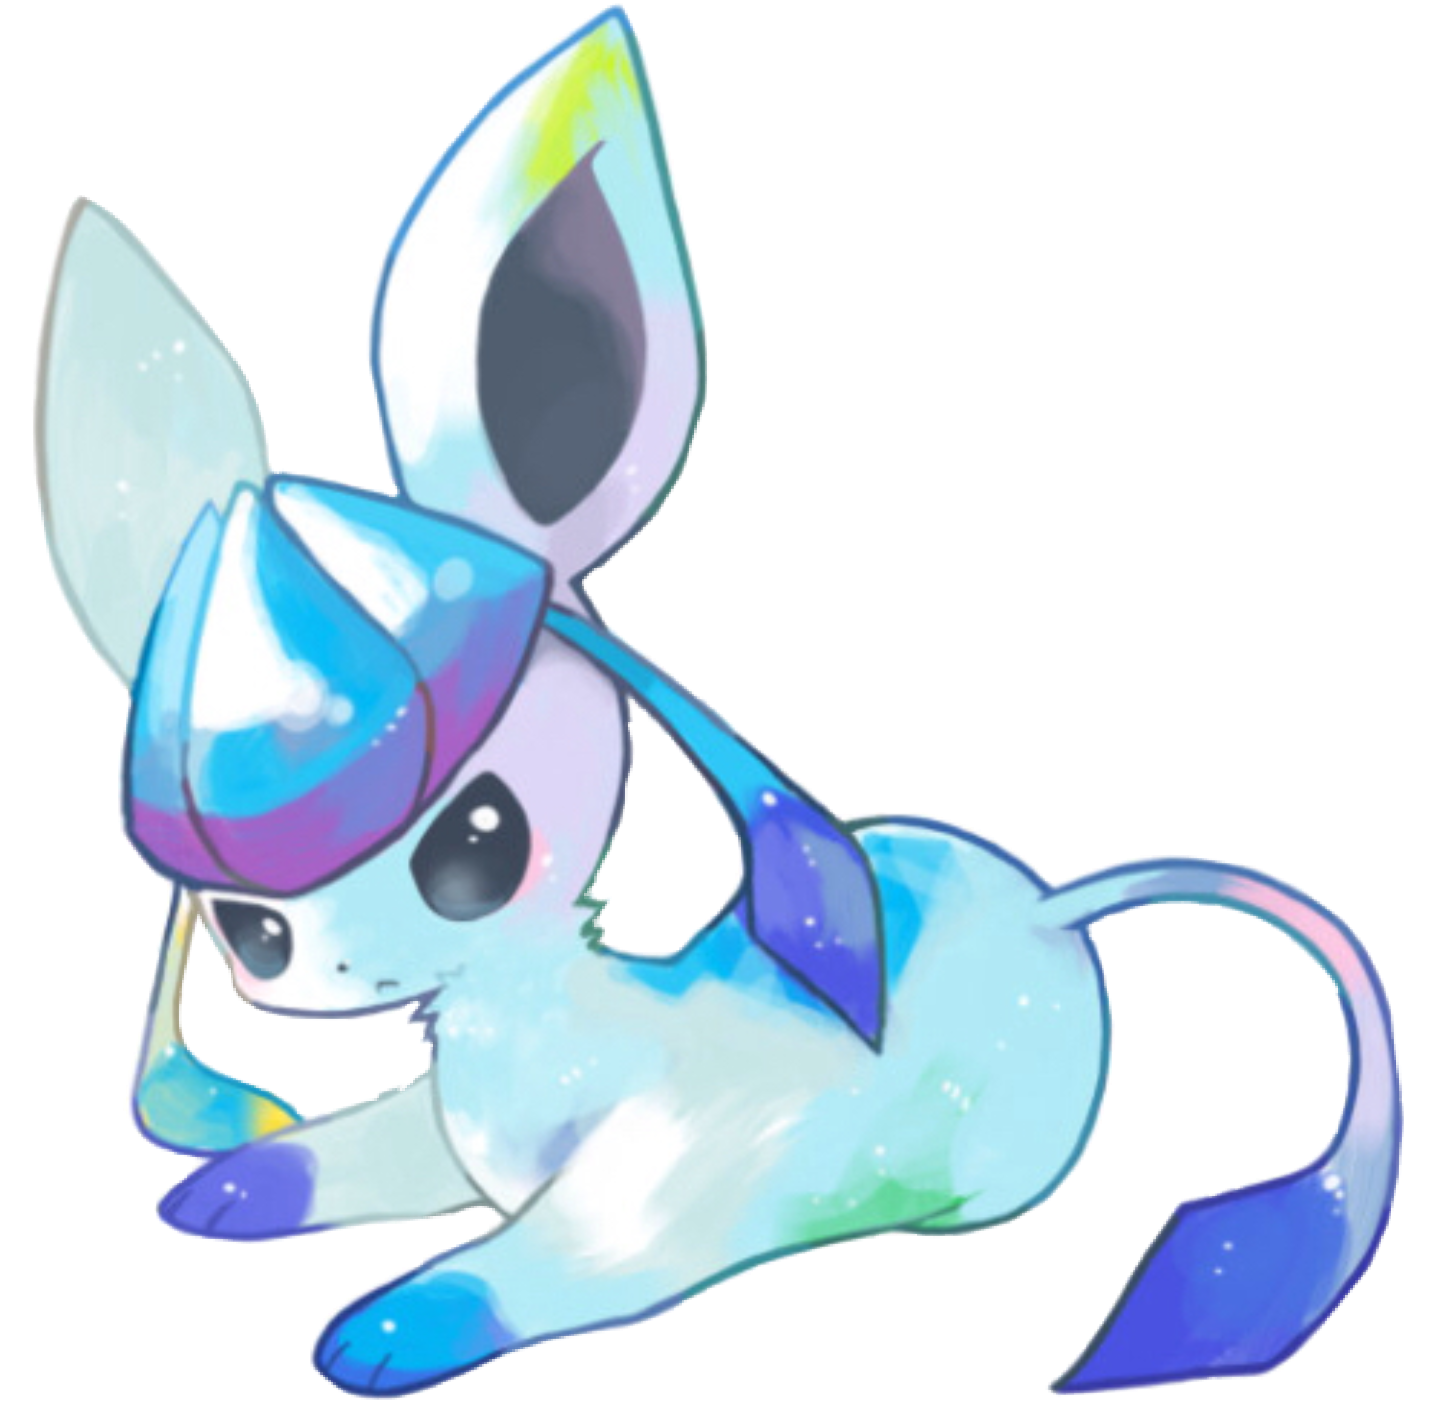 glaceon freetoedit #glaceon sticker by @anna_thepotatogirl04.